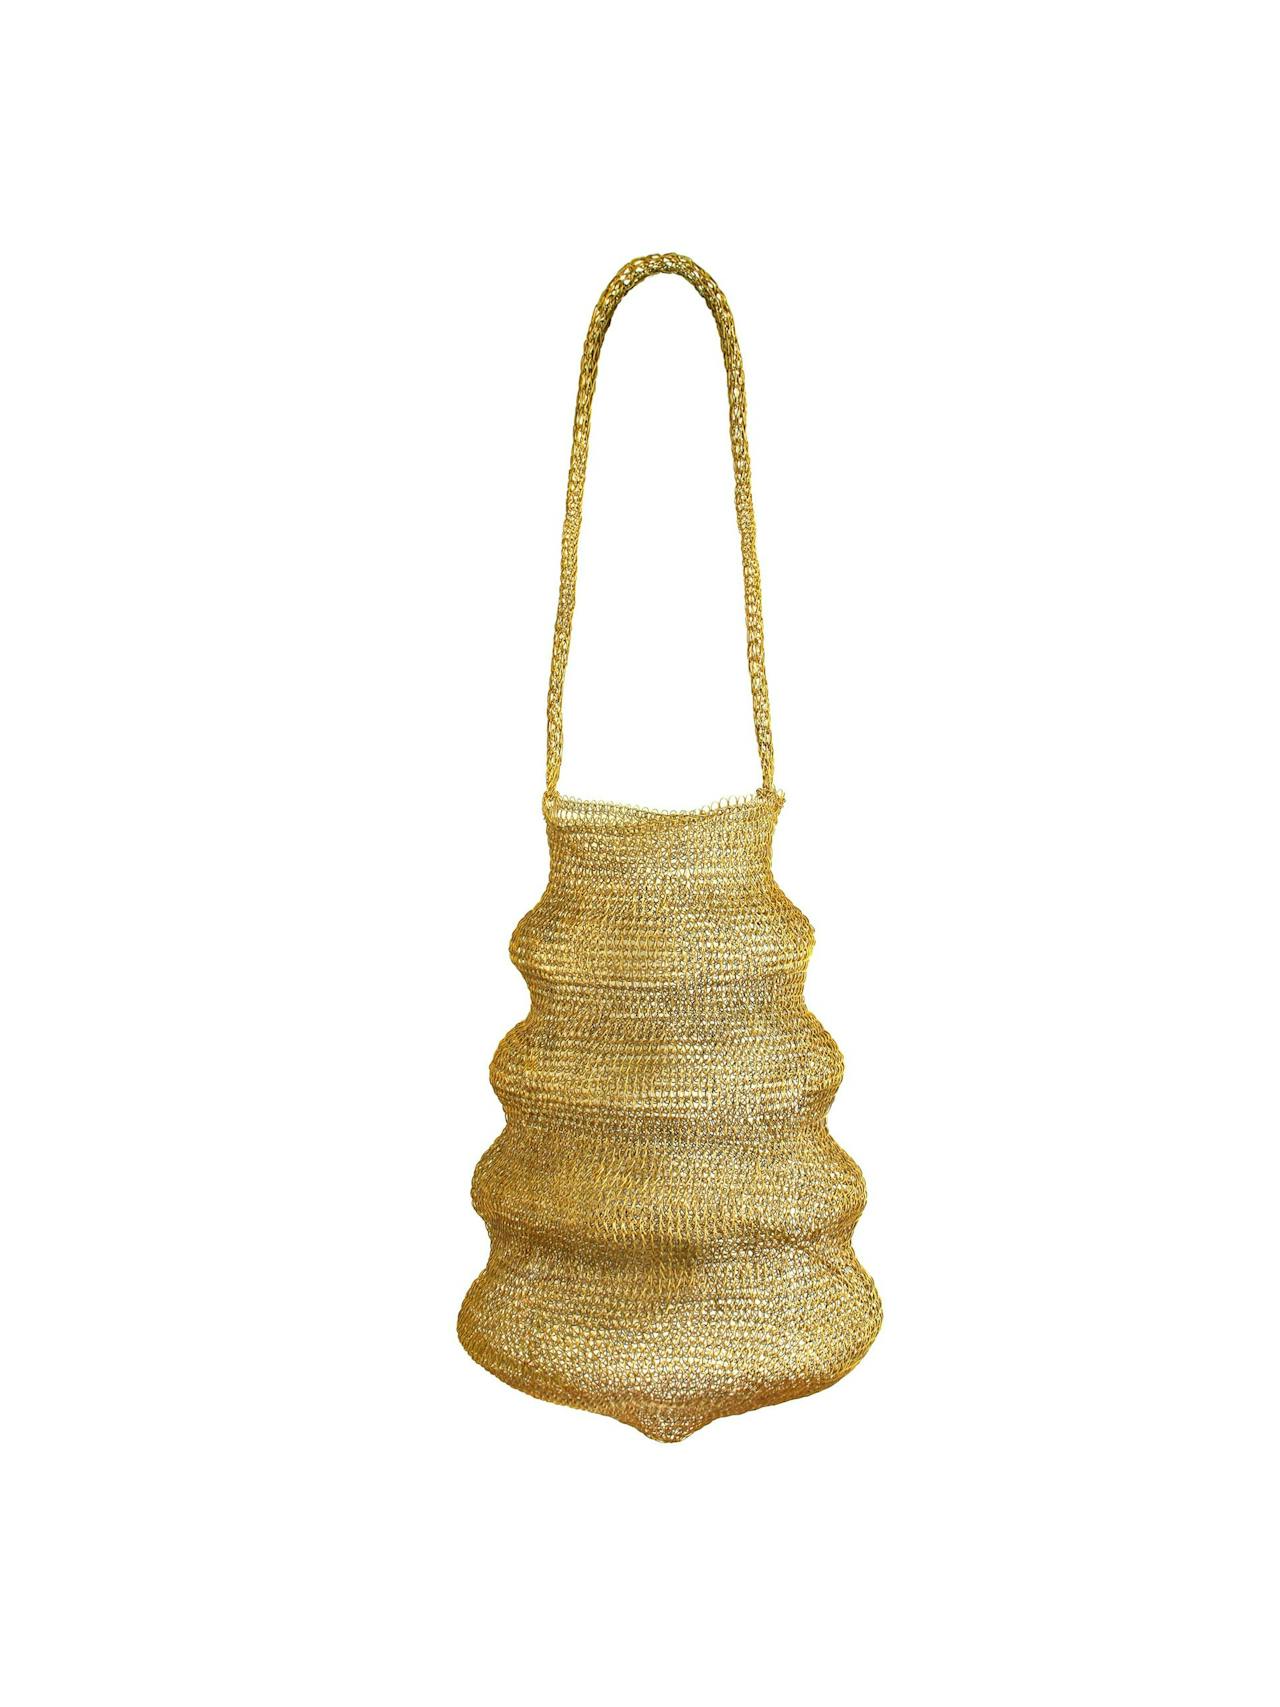 Shell handwoven wire bag in dark gold